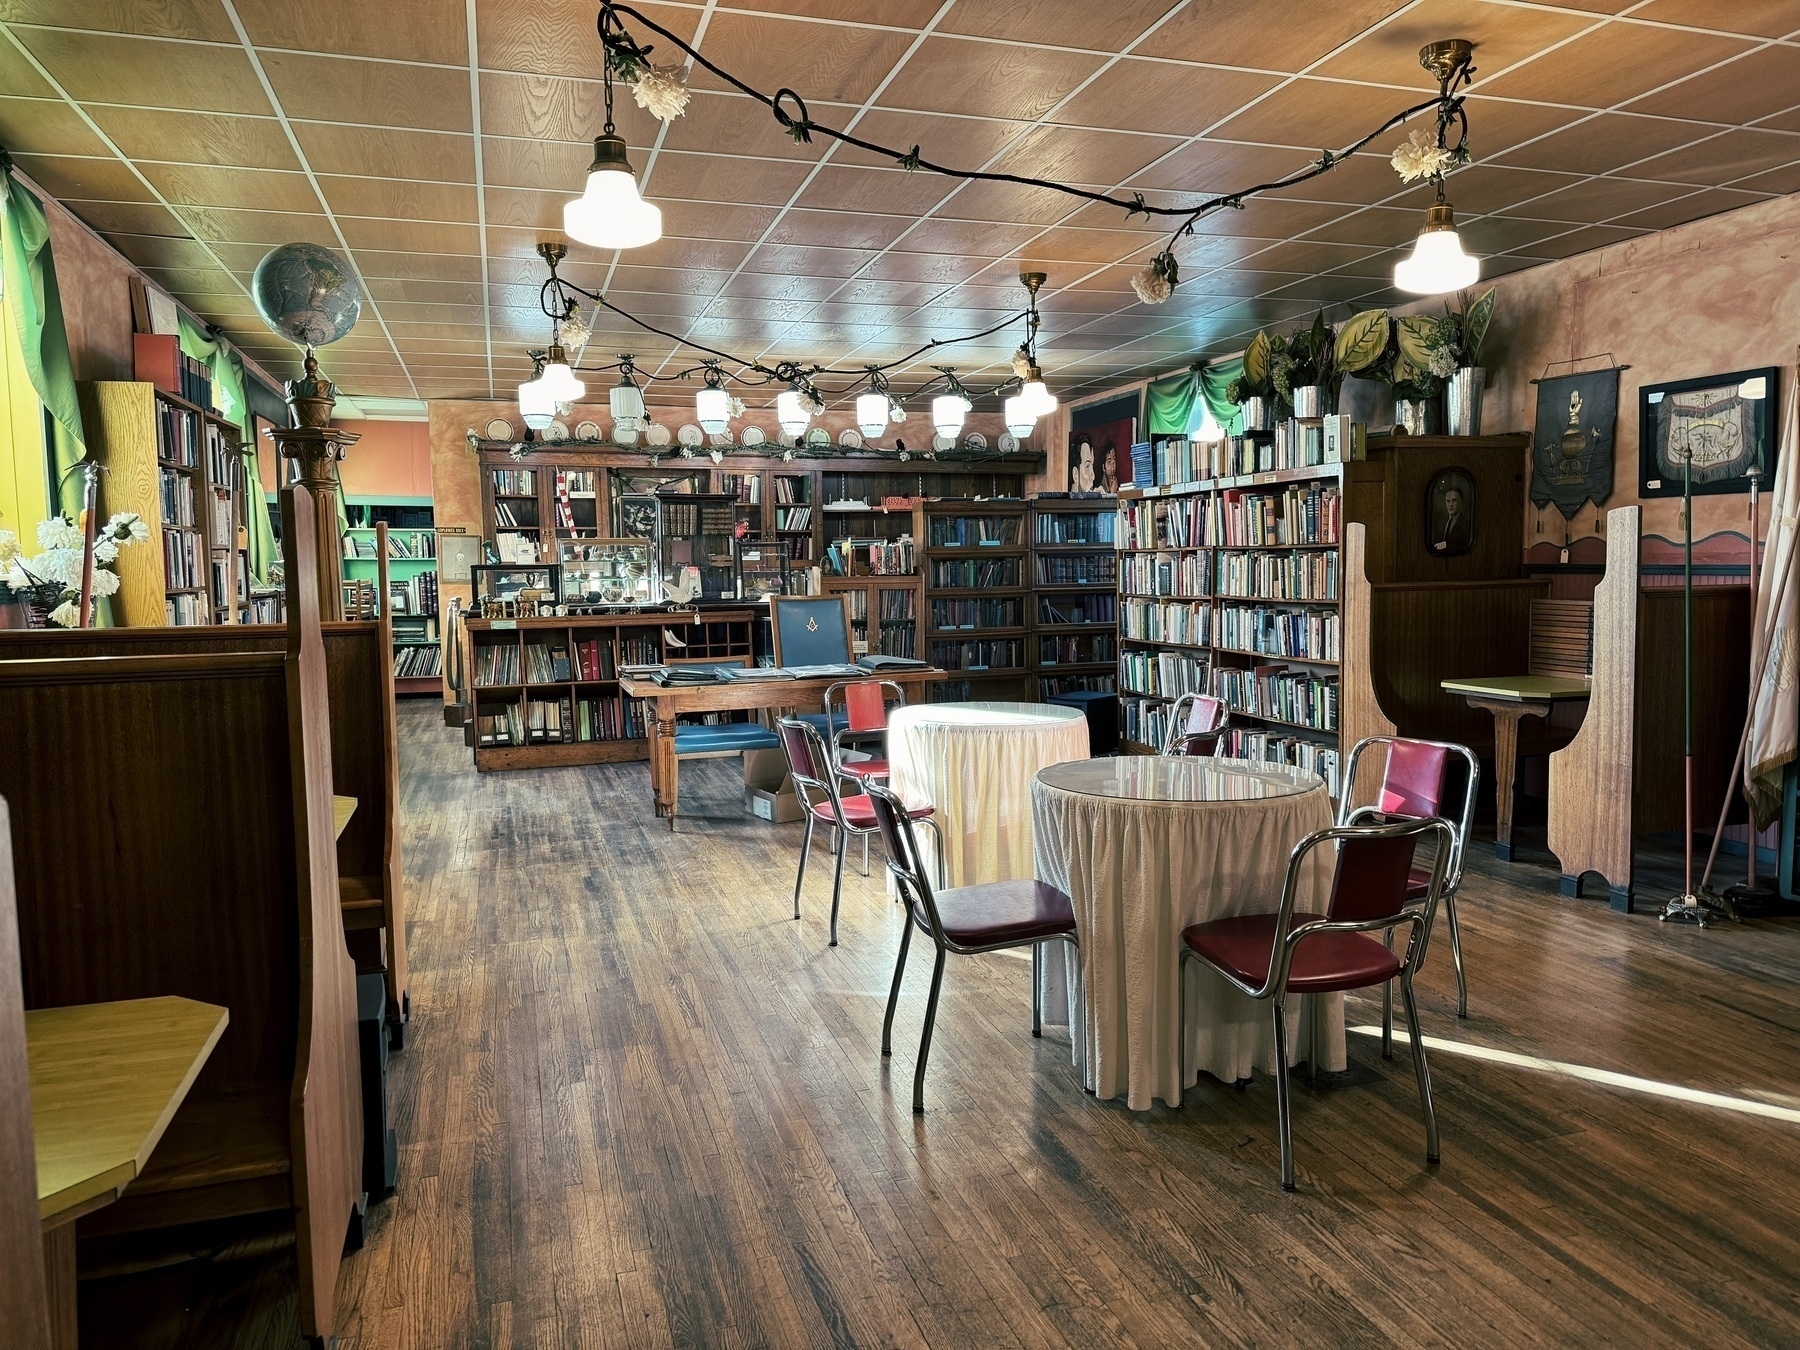 interior of bookstore lined with old books and classics, in what appears to be a hybrid bookstore and restaurant with booths